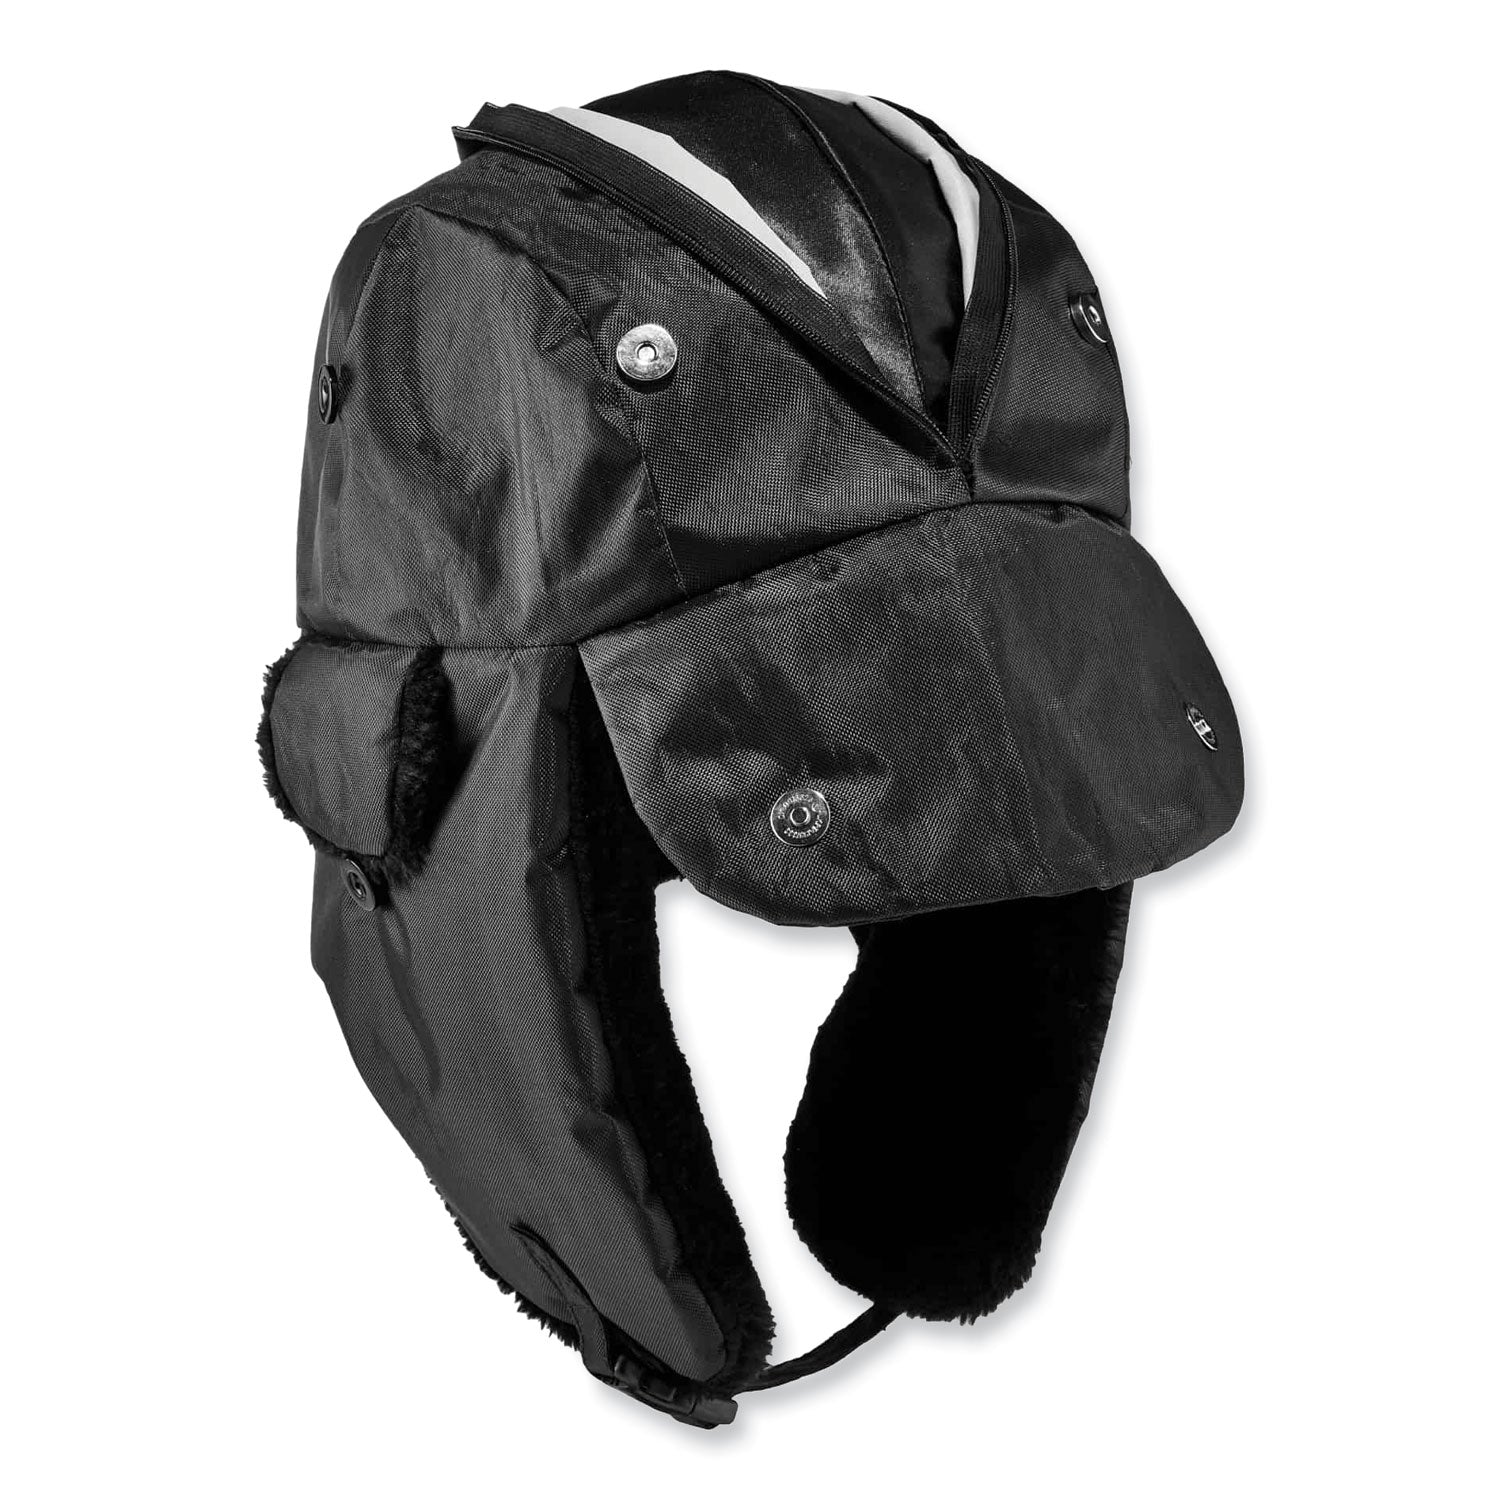 n-ferno-6802z-zippered-trapper-hat-large-x-large-black-ships-in-1-3-business-days_ego16859 - 1